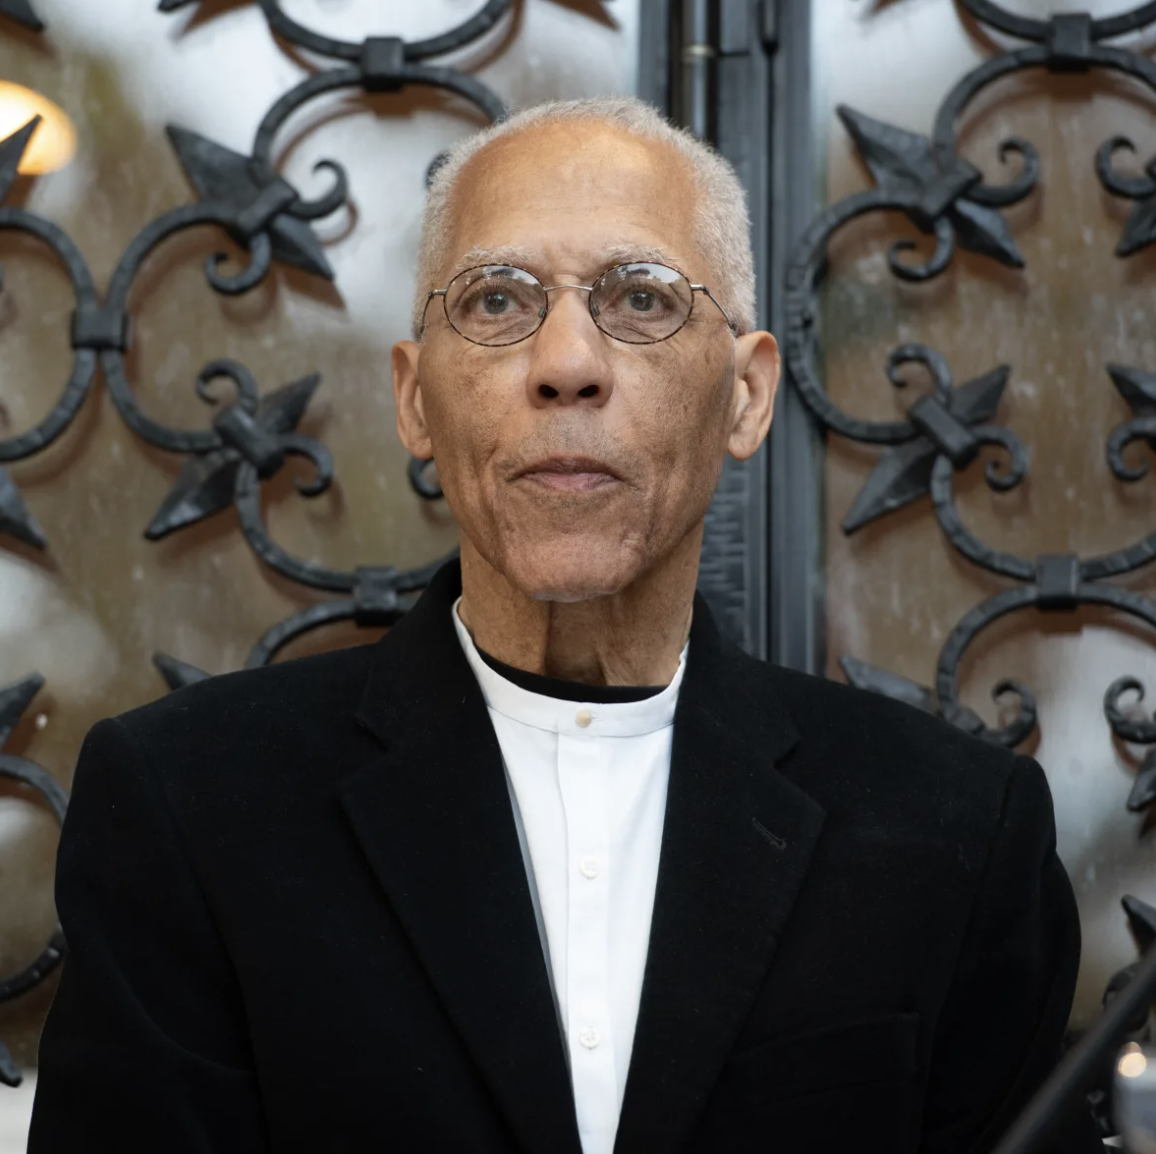 Featured image for “Martin Puryear B.F.A. ’71, M.F.A. ’71, D.F.A. (Hon.)’94 Awarded 2020 Getty Medal”